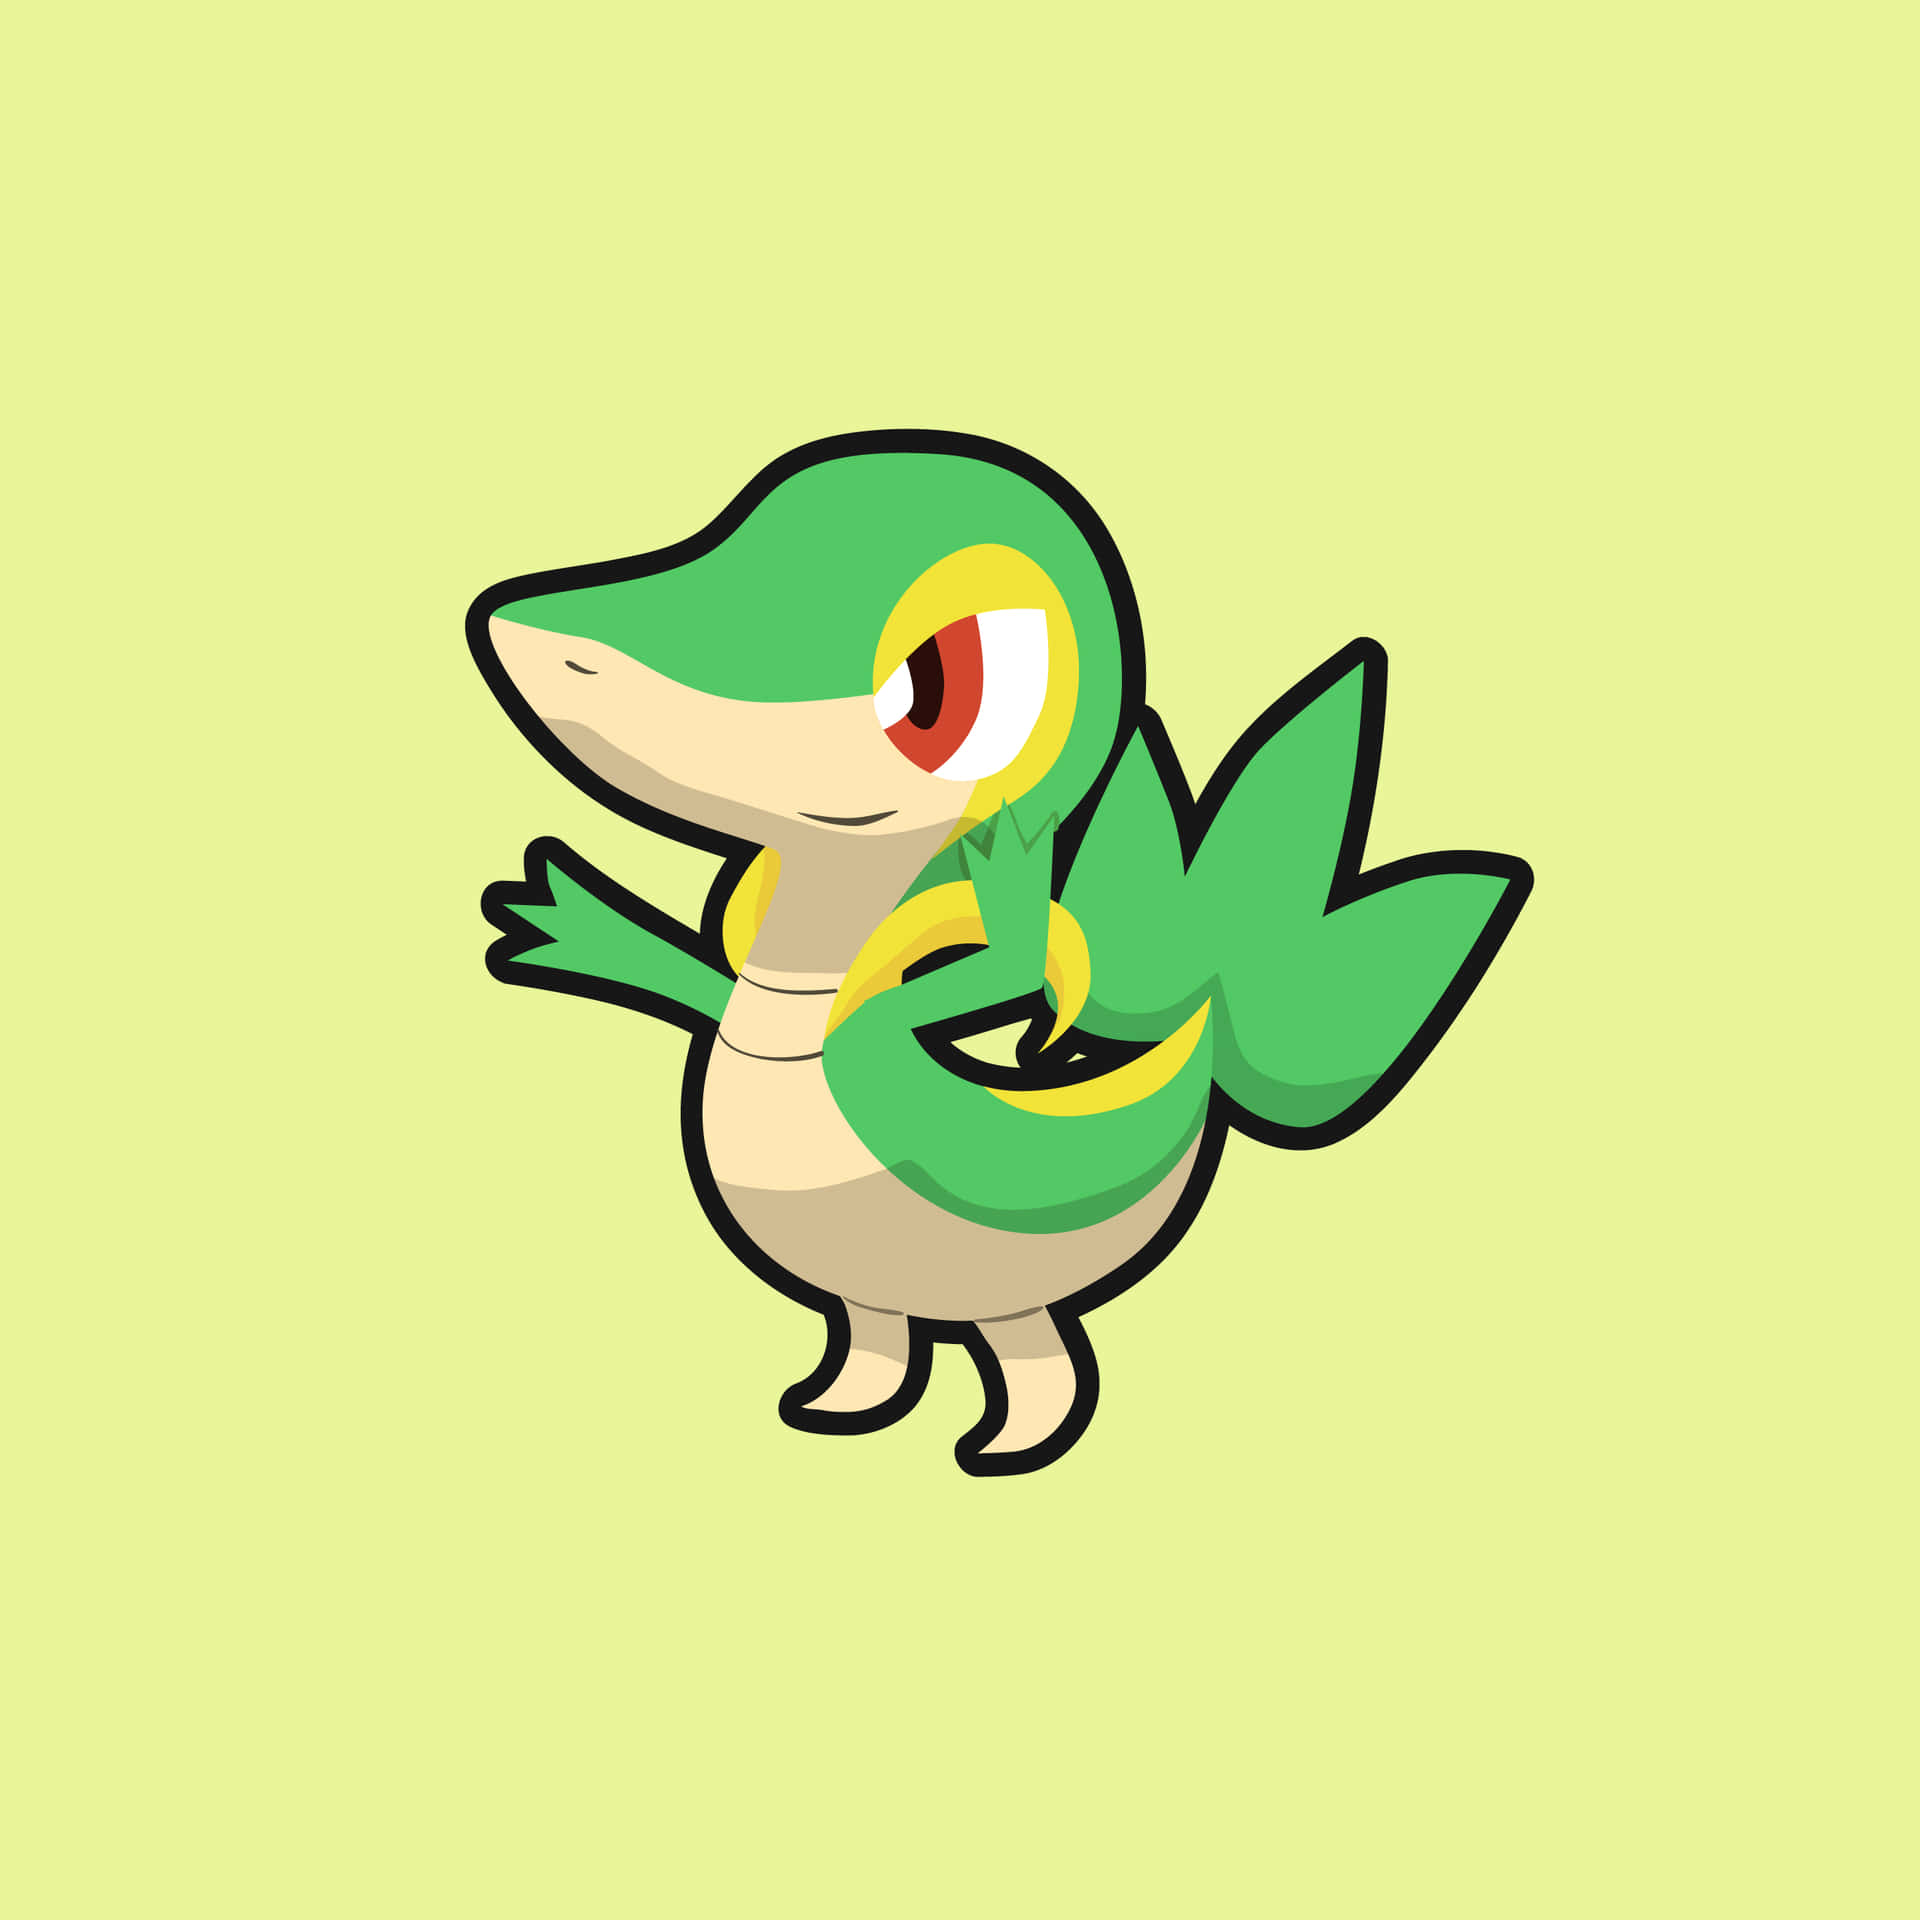 Snivy, The Cute Grass Pokemon, Shining Bright Against A Yellow Background Background